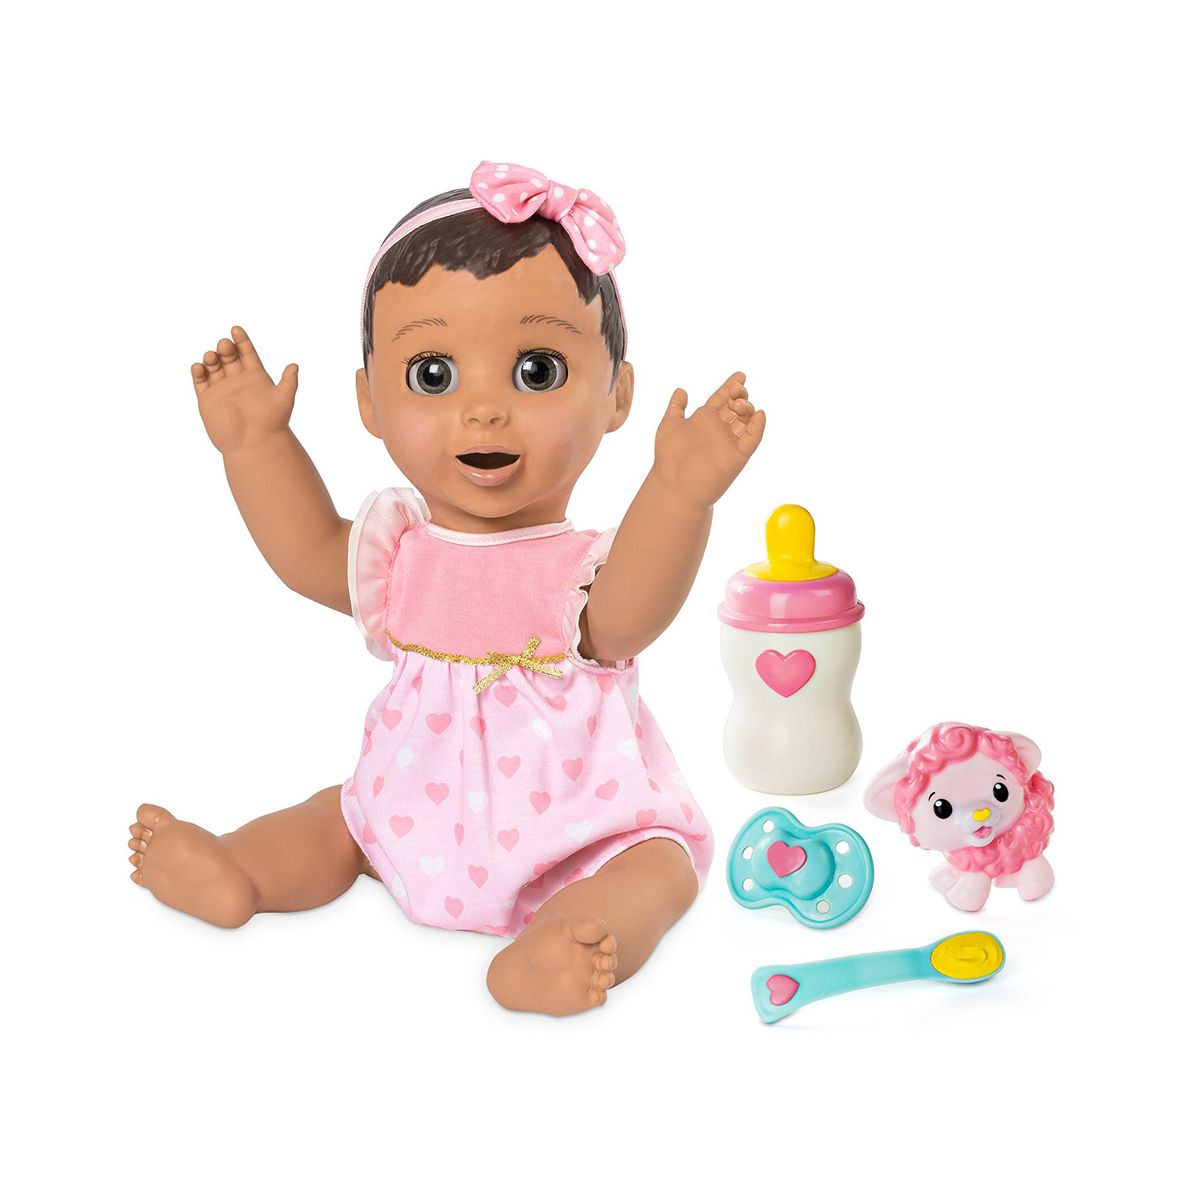 Luvabella Responsive Baby Doll